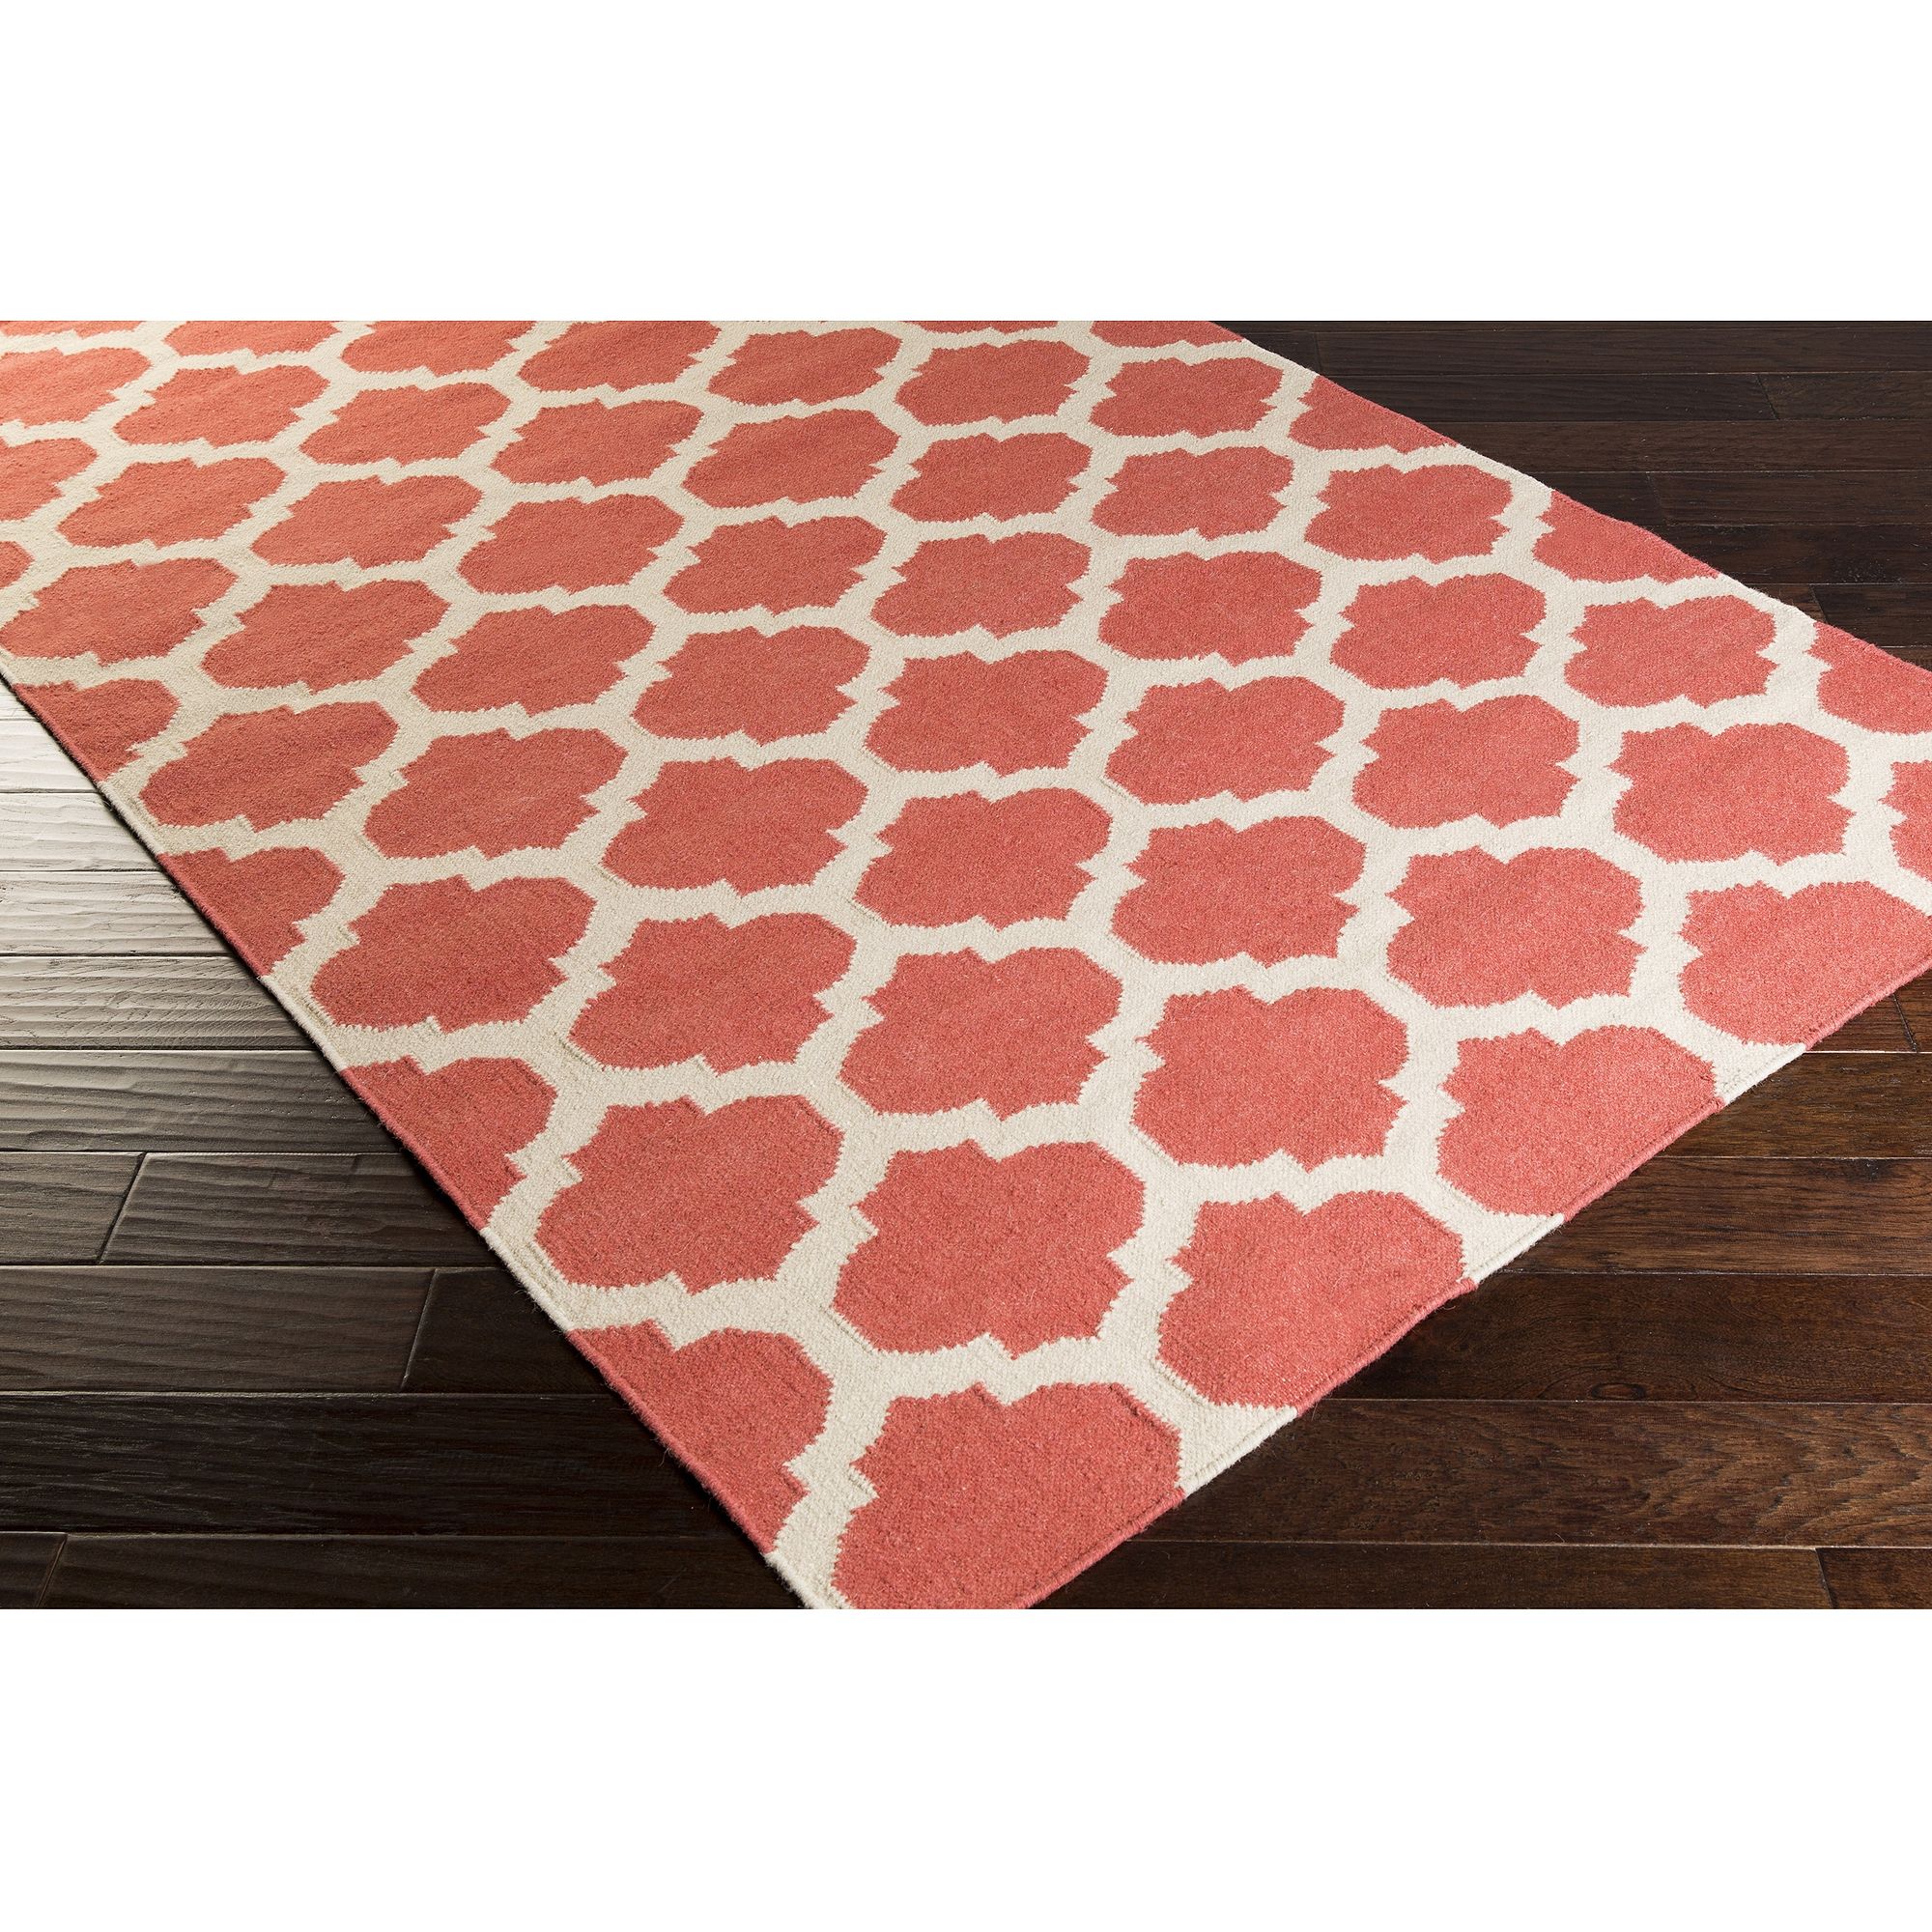 Large Wool Area Rugs Roselawnlutheran Throughout Wool Area Rugs 10× (View 11 of 15)